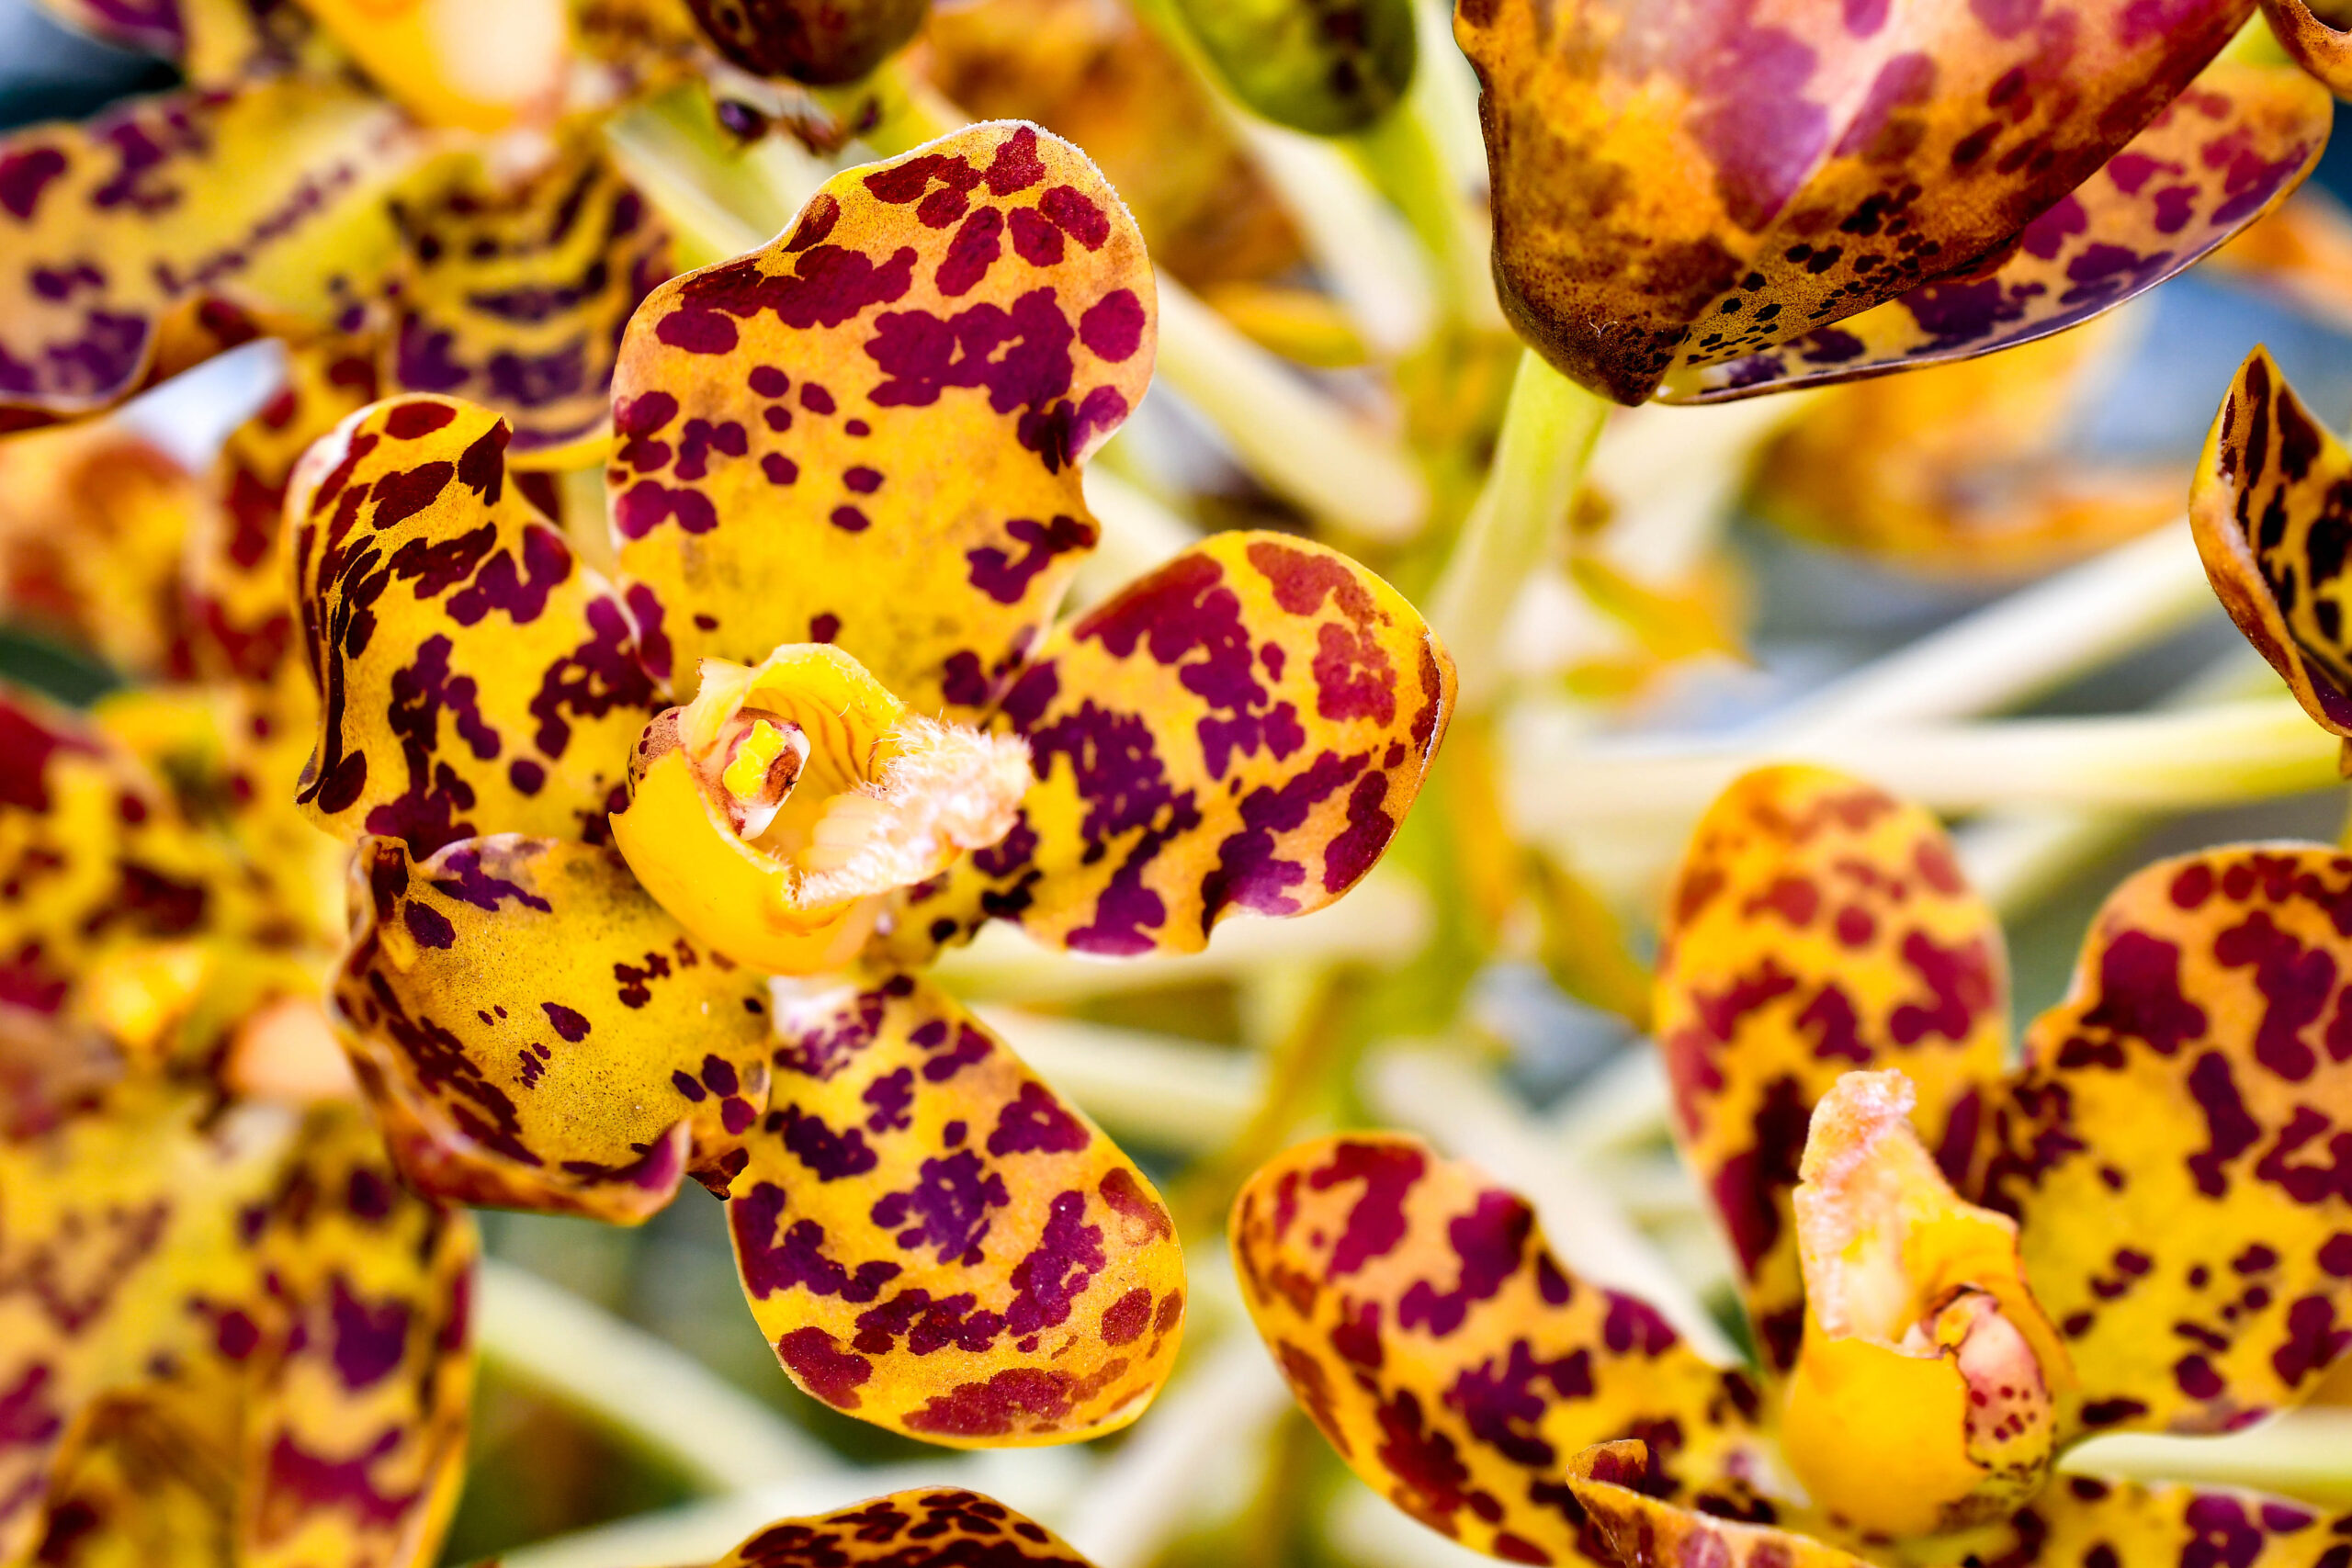 Tiger orchid - possibly Grammatophyllum speciosum. A close up of several flowers on a large inflorescence. The main color is yellow, overlaid with maroon dots and blotches on the petals and sepals.